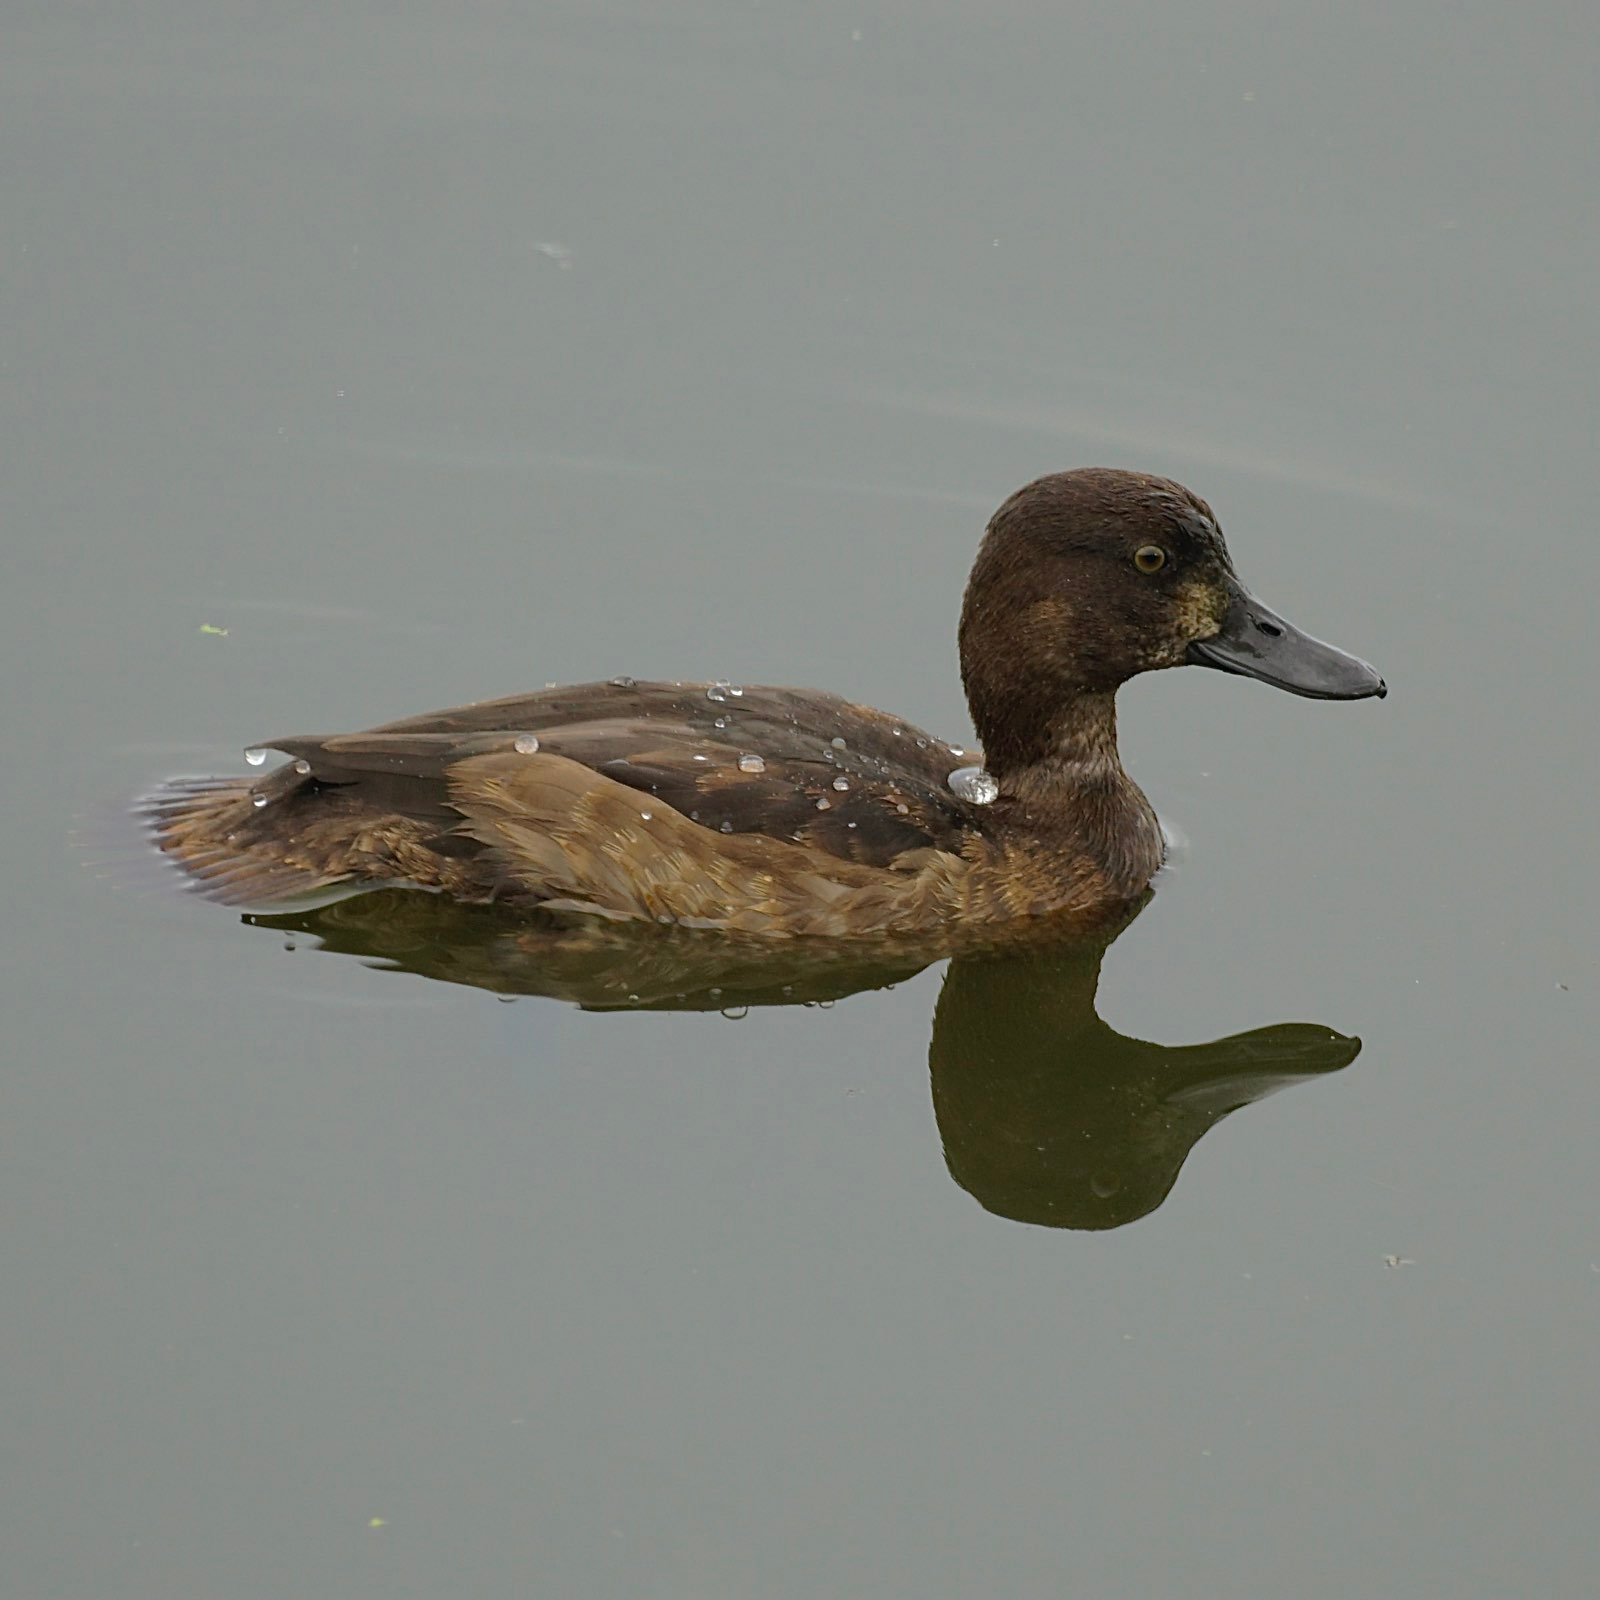 A female tufted duck with no tuft.